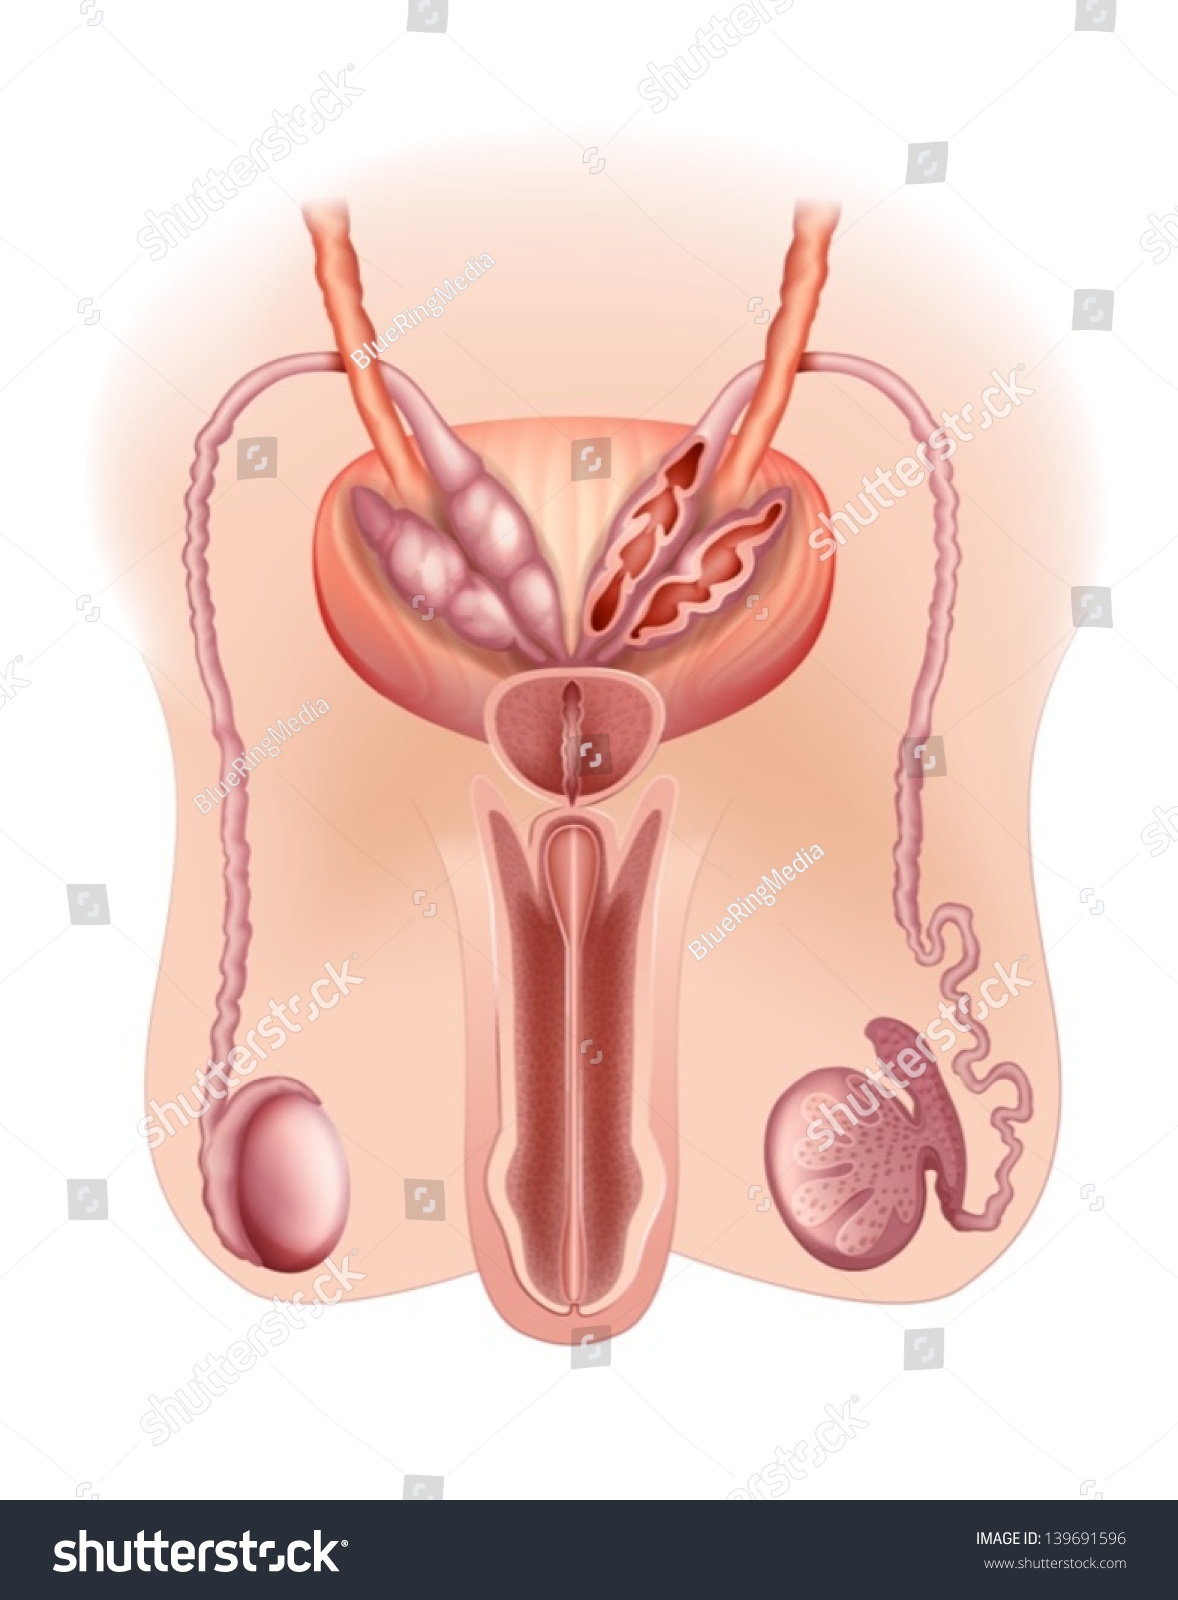 Diagram Of The Male Reproductive System Stock Vector